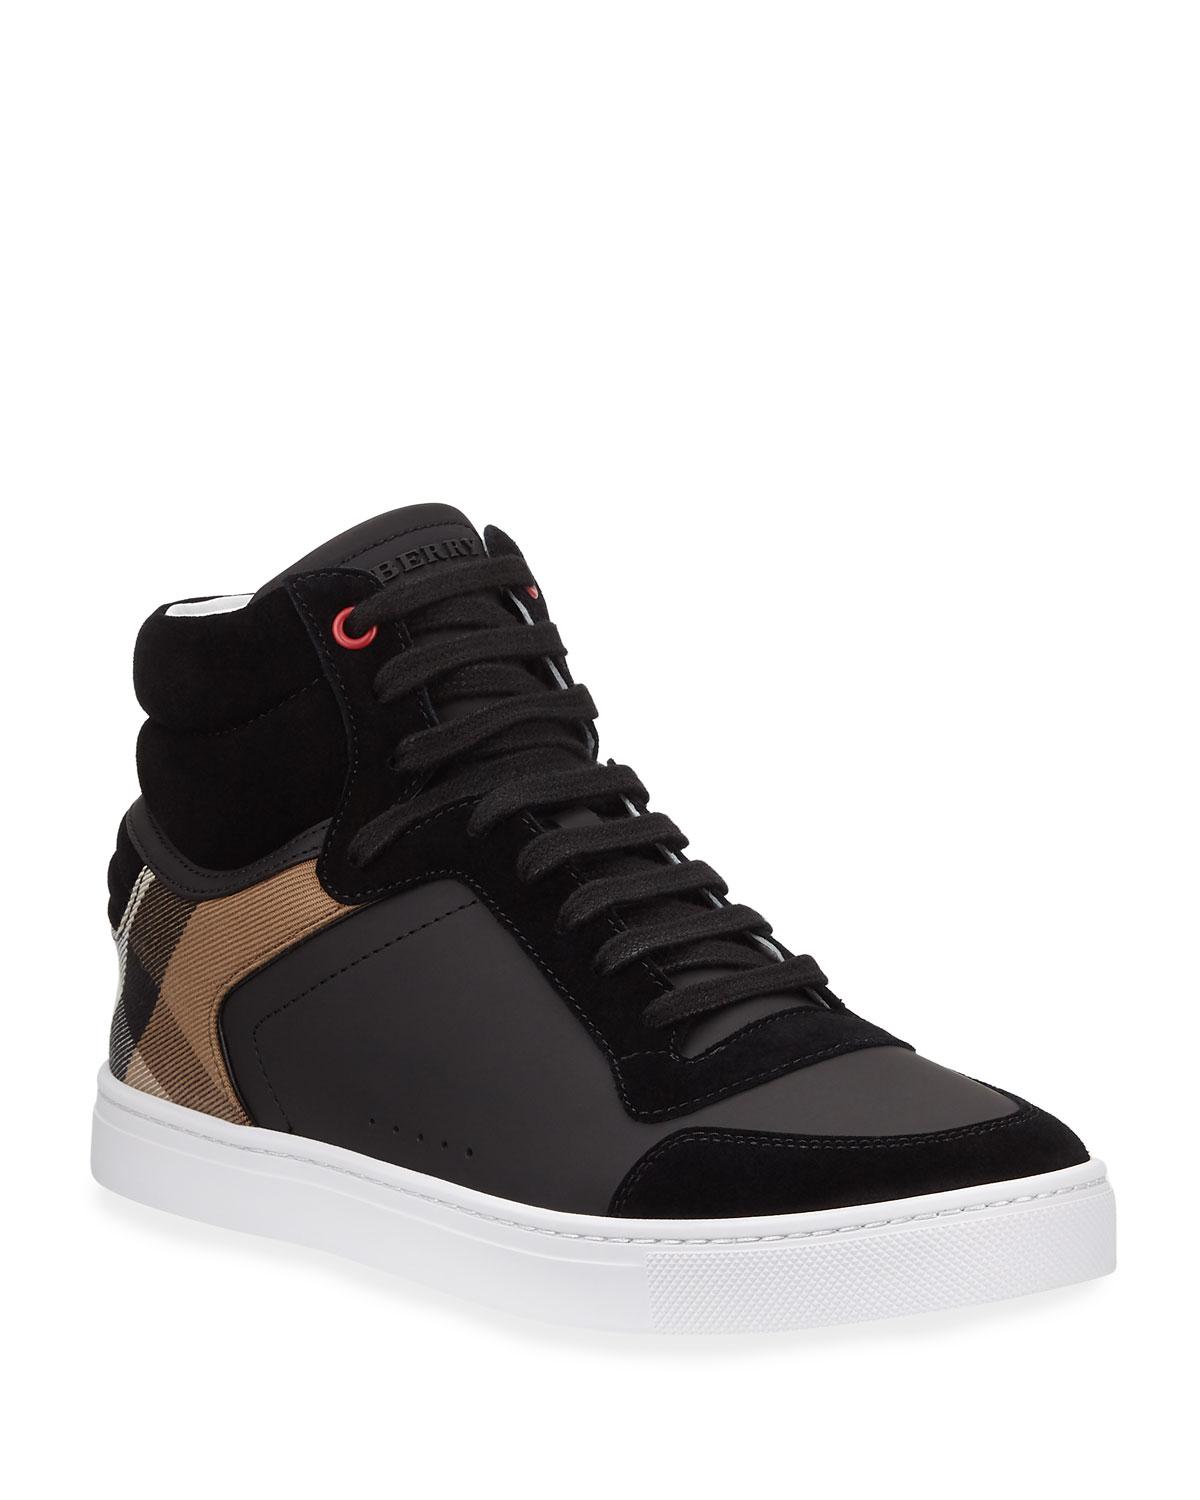 Burberry Men's Leather Check High-top Sneakers in Black for Men - Lyst